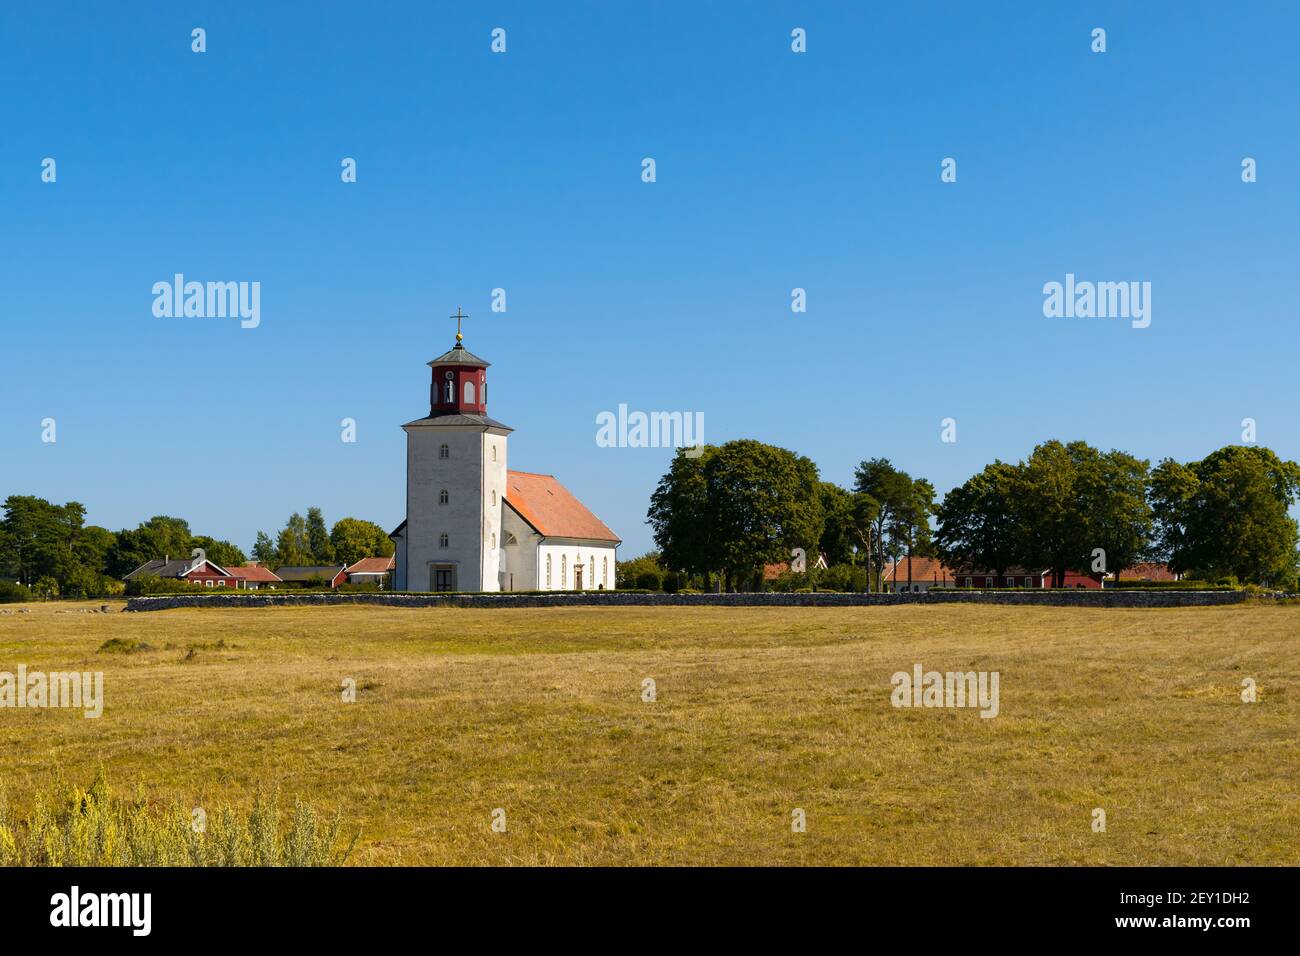 Church in the village Gardby on the island Oeland, Sweden Stock Photo